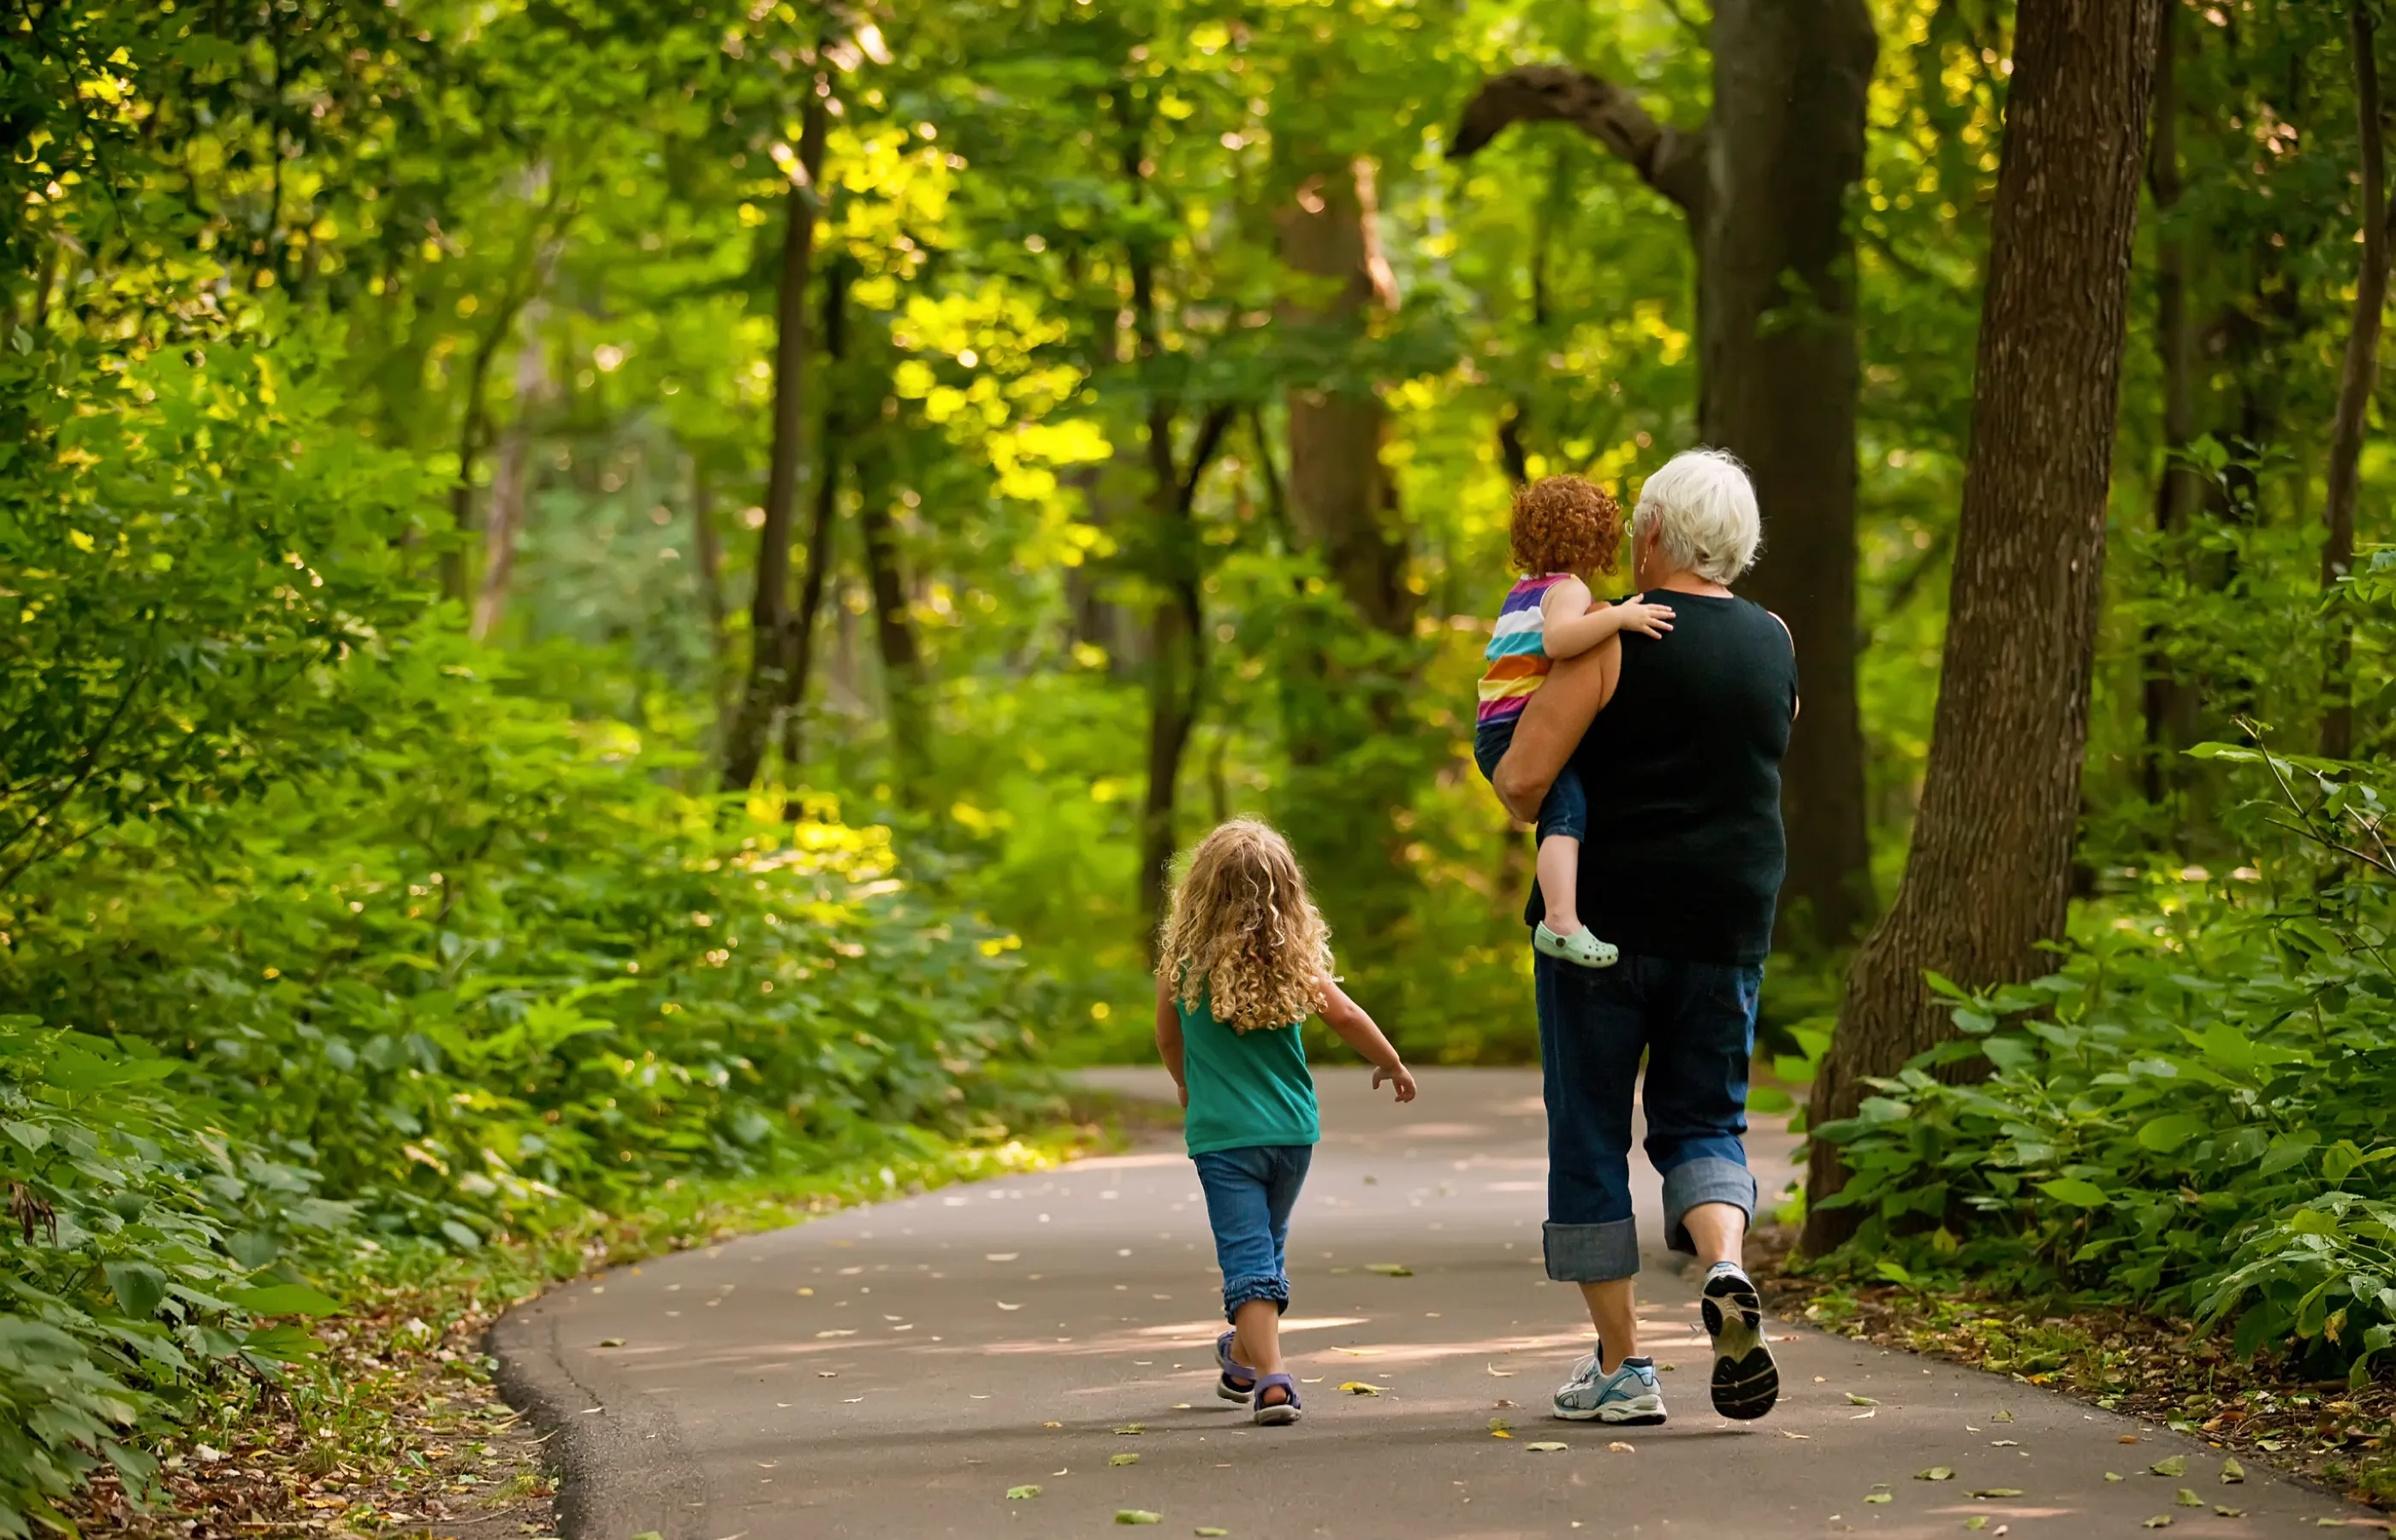 Grandmother is walking a greenway trail with her two grand children. One child is walking along side her as she carries the younger child.  